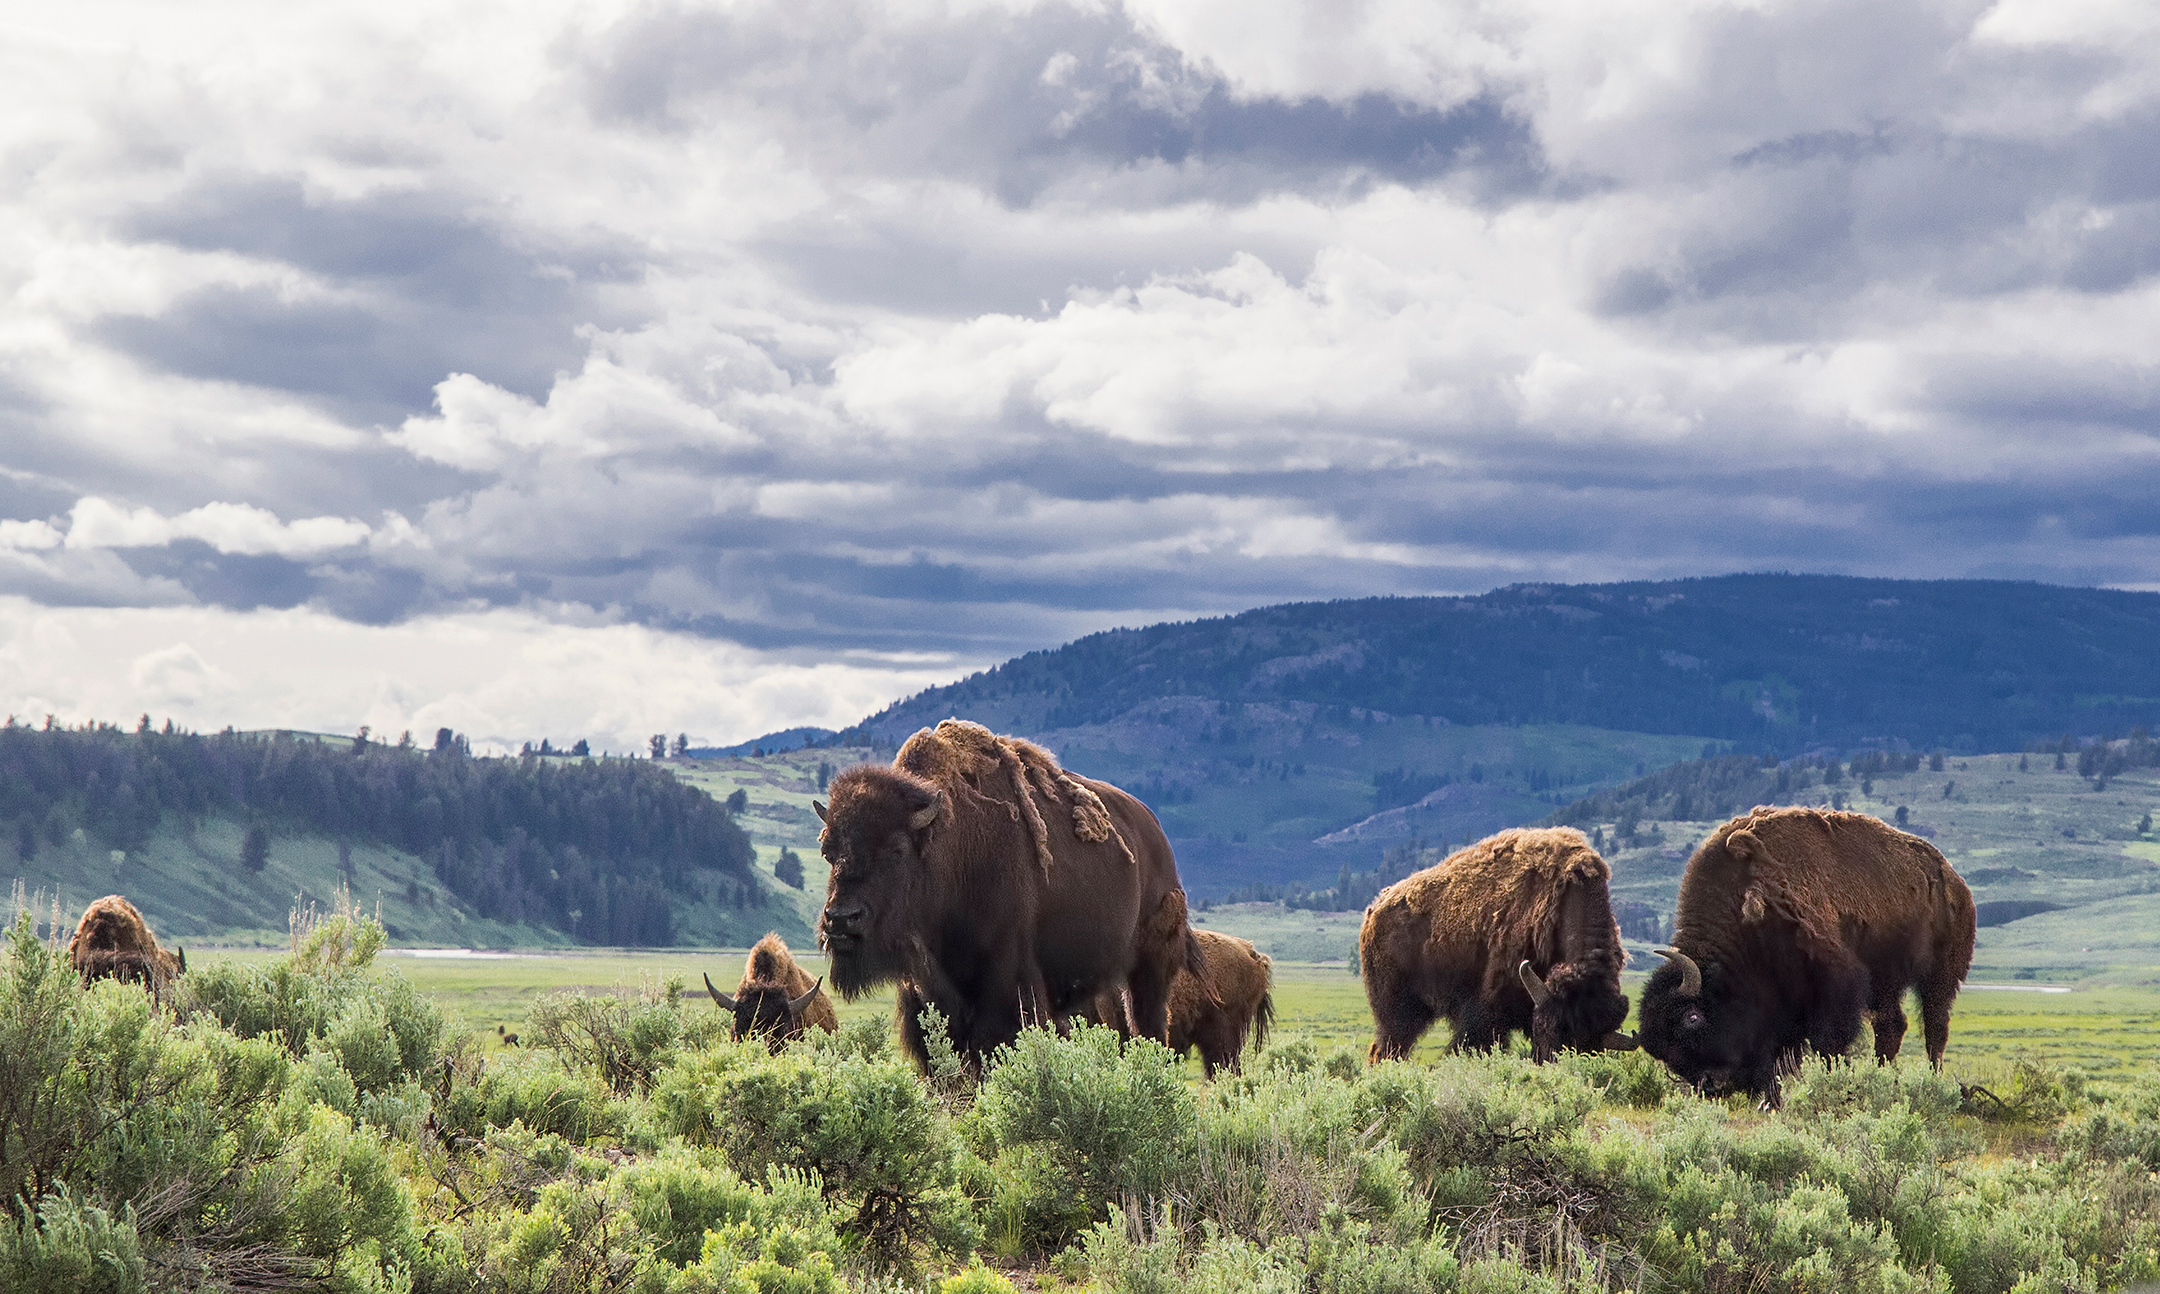 American bison in Lamar Valley, Yellowstone National Park, Wyoming, USA - stock photo